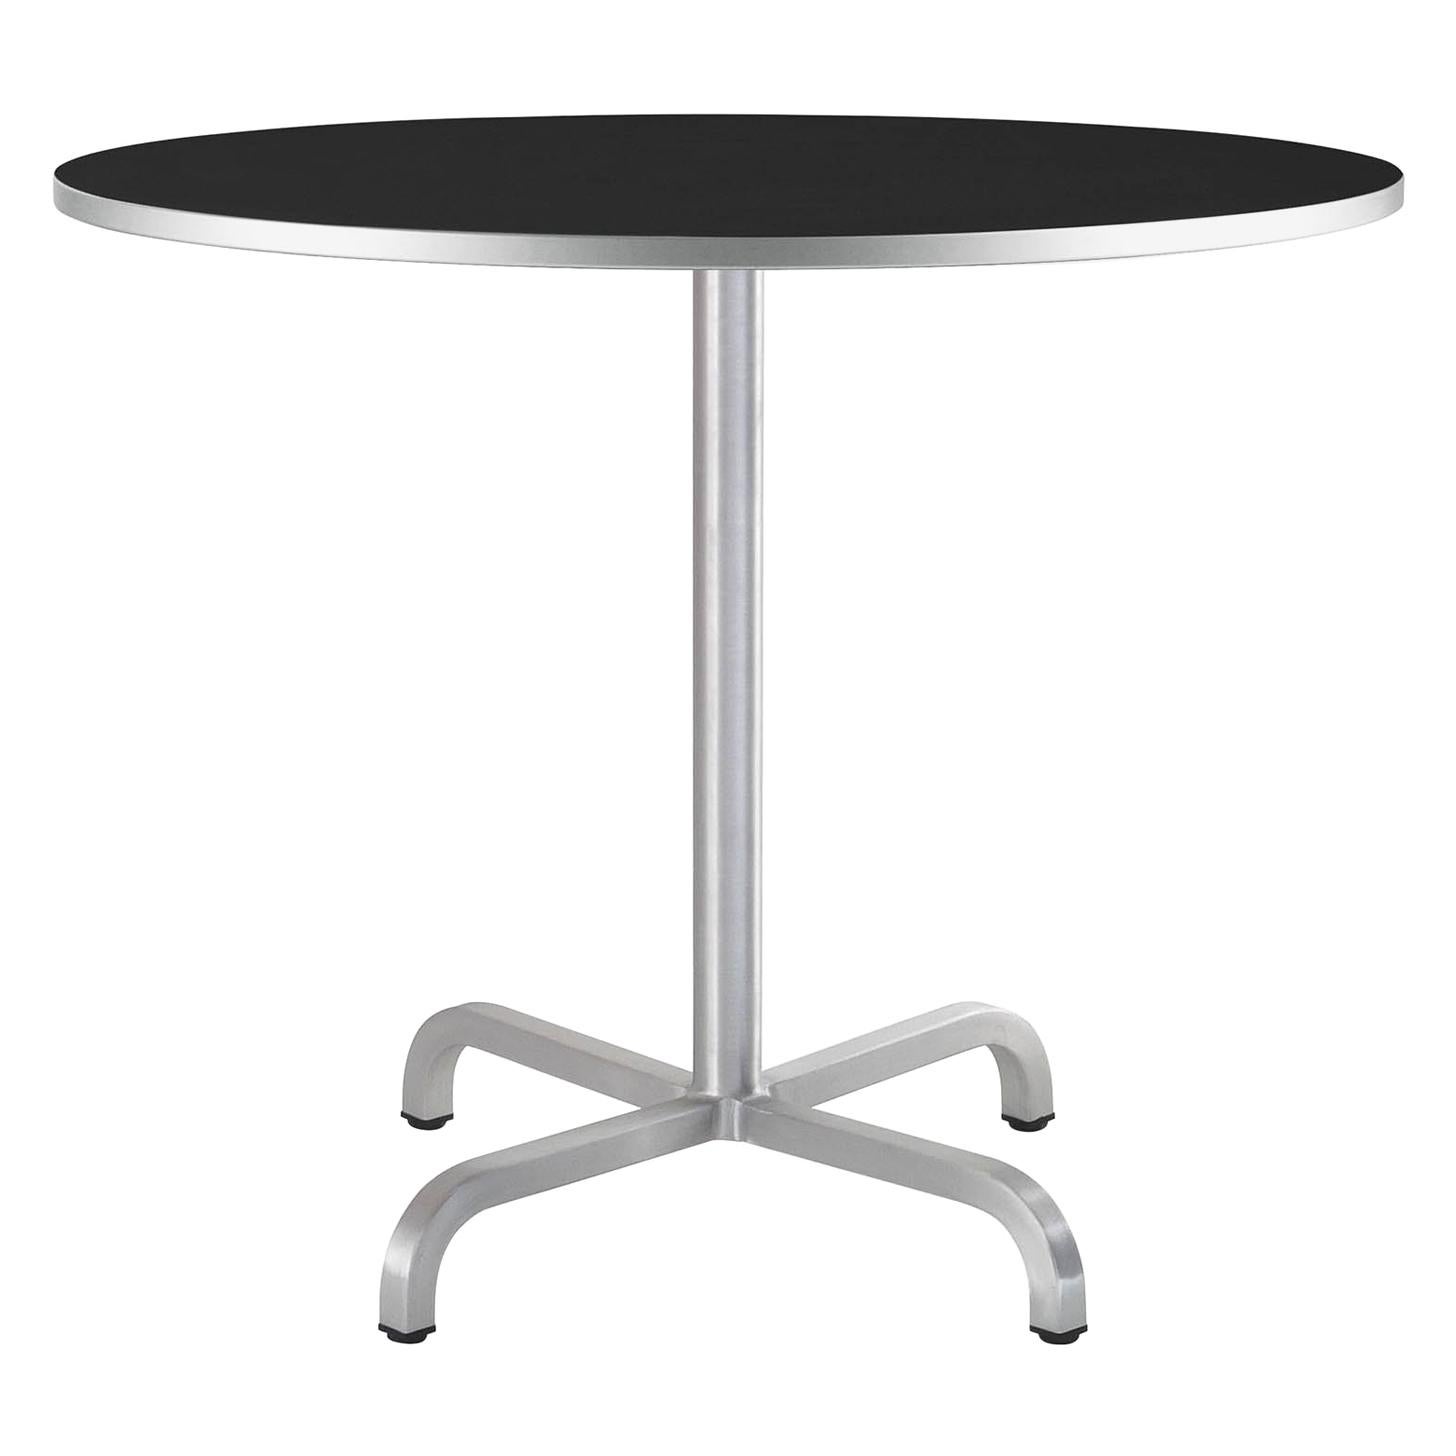 Emeco 20-06 Large Round Café Table with Black Laminate Top by Norman Foster For Sale